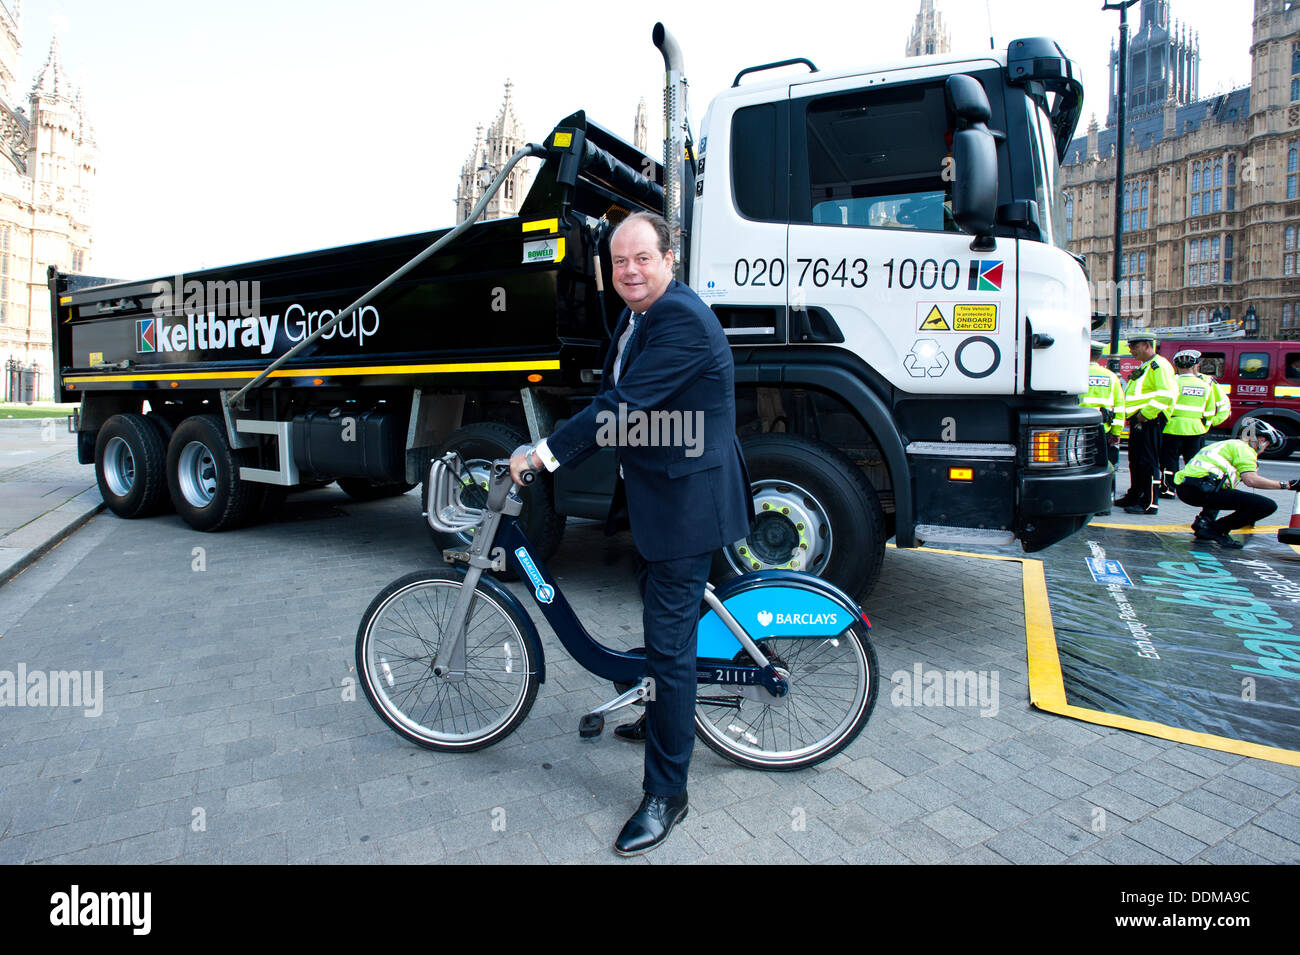 London, UK - 4 September 2013: the Transport Minister Stephen Hammond poses for a picture next to a Heavy Goods Vehicle (HGV) during the Metropolitan Police ‘Exchanging Places’ event, organised to raise awareness of the safety issues faced by lorry drivers and cyclists. Credit:  Piero Cruciatti/Alamy Live News Stock Photo